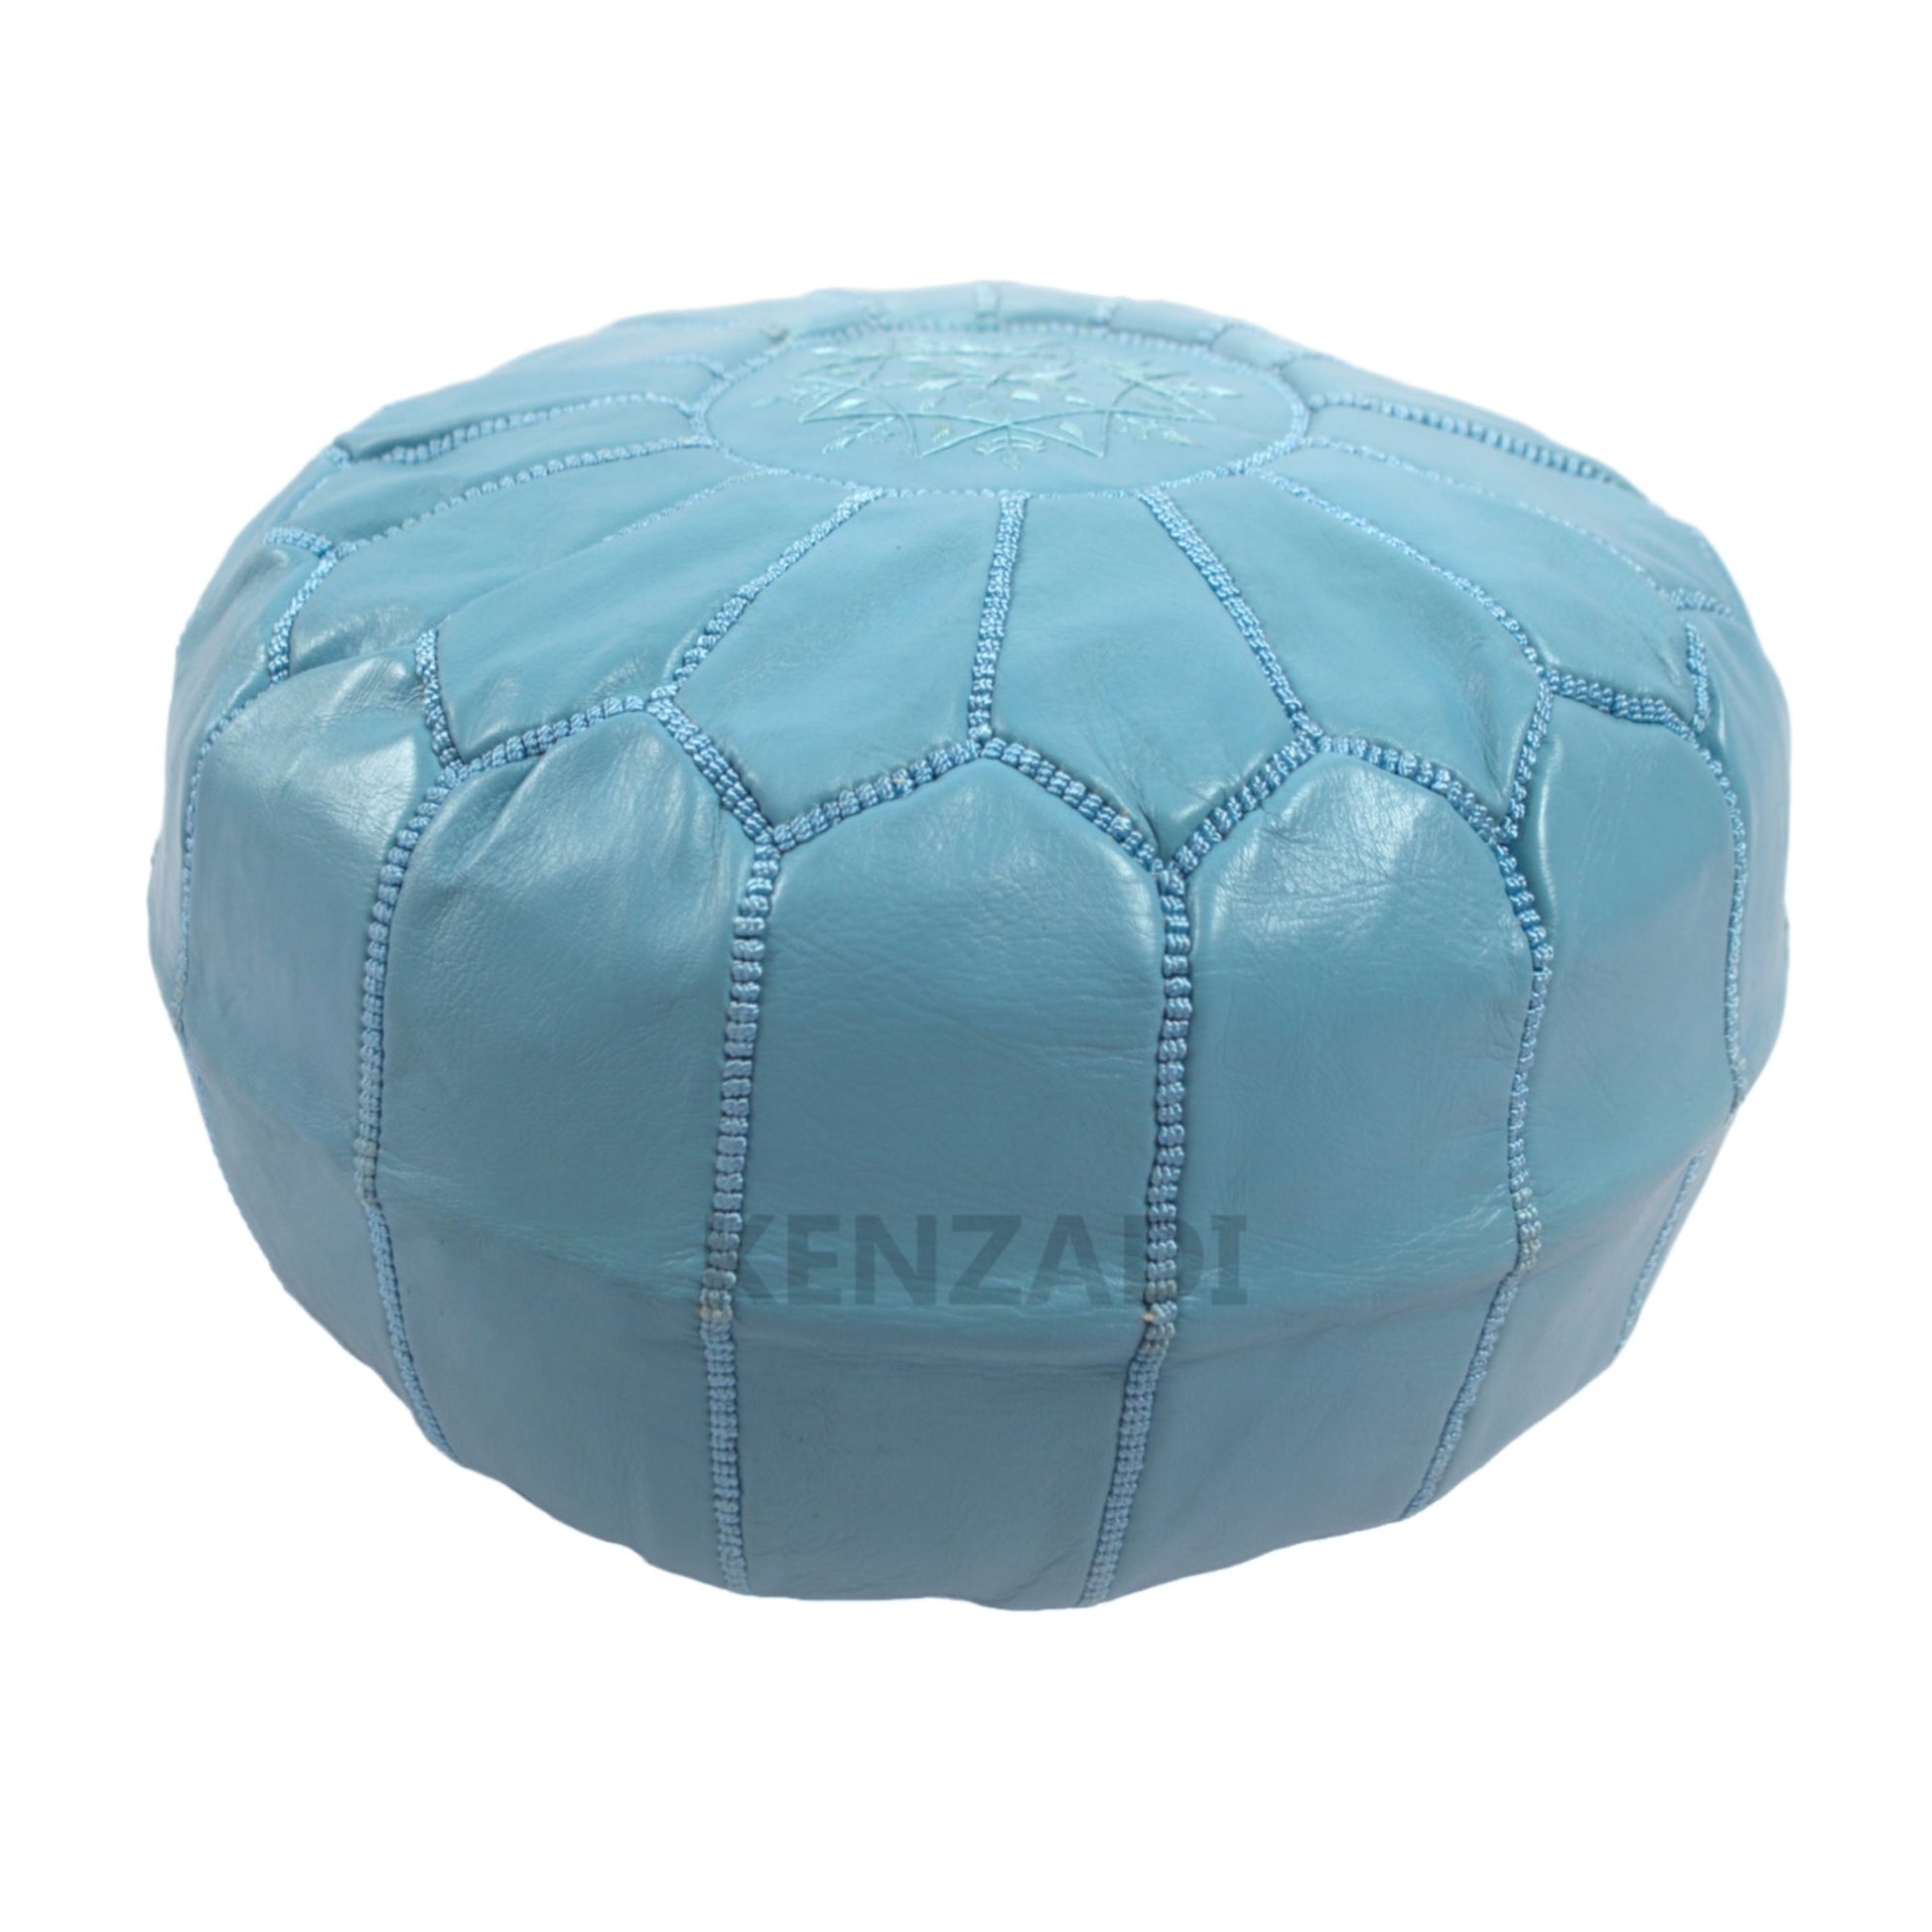 Moroccan leather pouf, round pouf, berber pouf, Light Blue with Light Blue embroidery by Kenzadi - Handmade by My Poufs